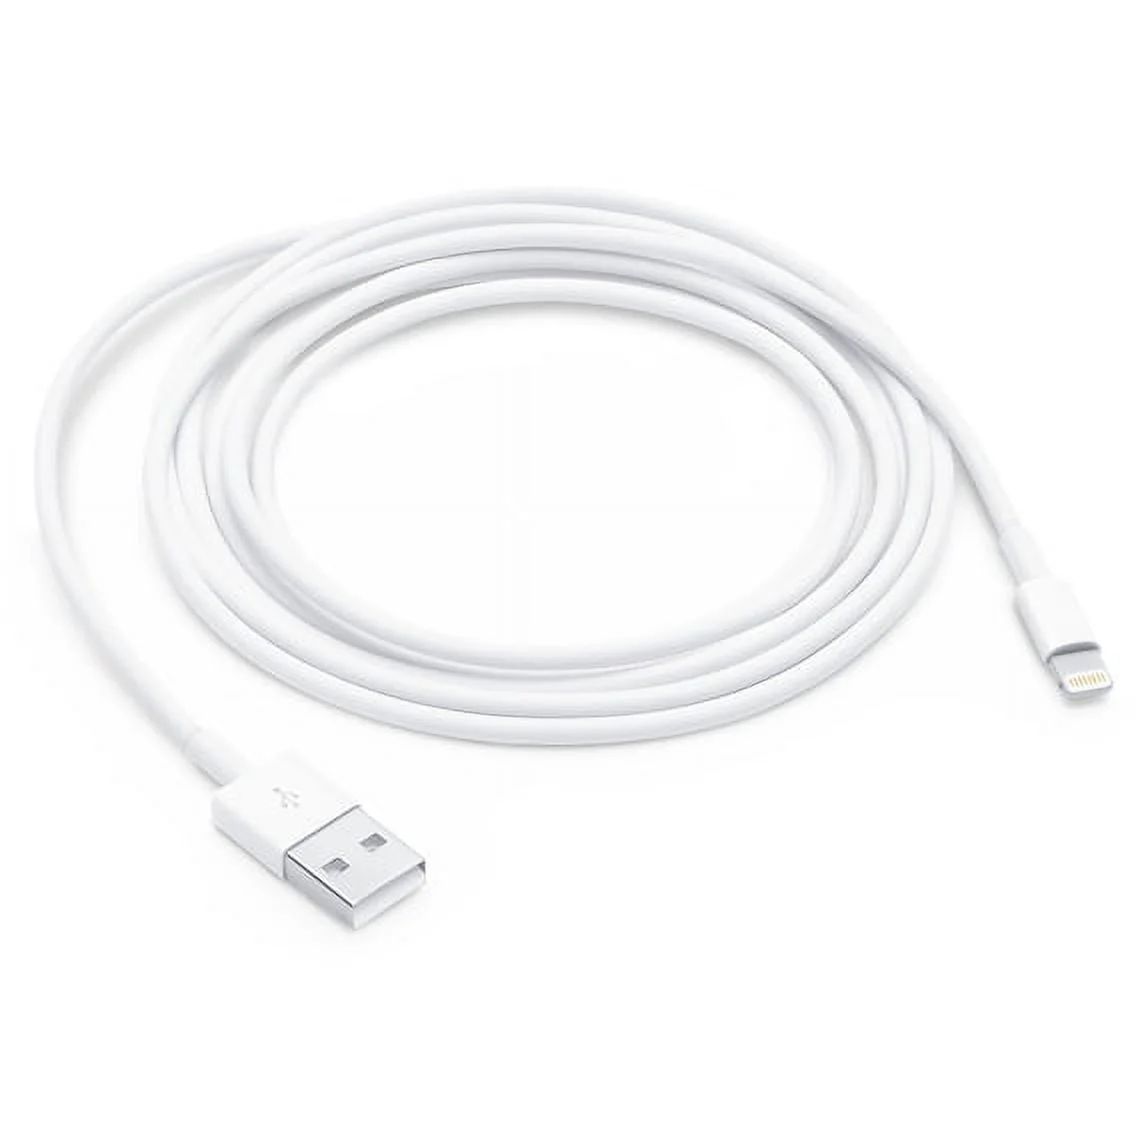 Apple USB-A to Lightning Cable for iPhone, iPad, Airpods, iPod - 6.6ft or 2m | Walmart (US)